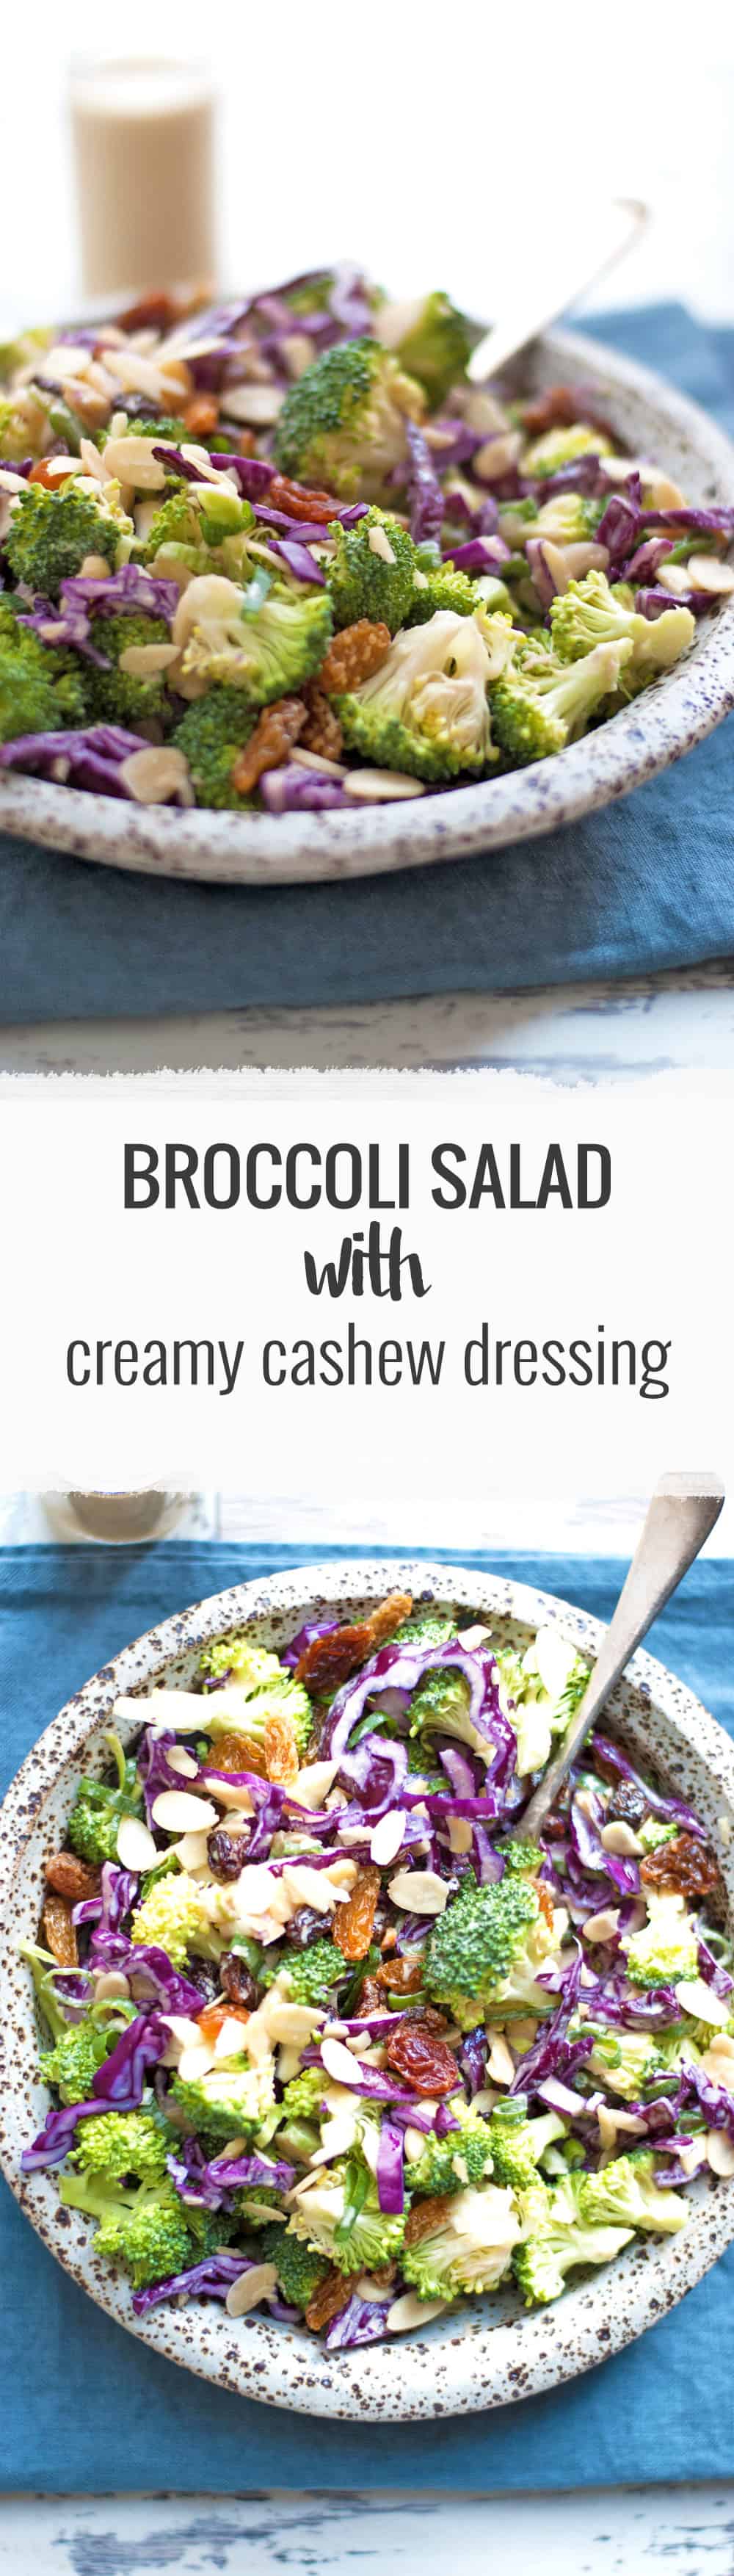 Super crunchy, fresh broccoli salad with creamy cashew dressing. Packed with all the good stuff, ready in 15 minutes! | via @annabanana.co